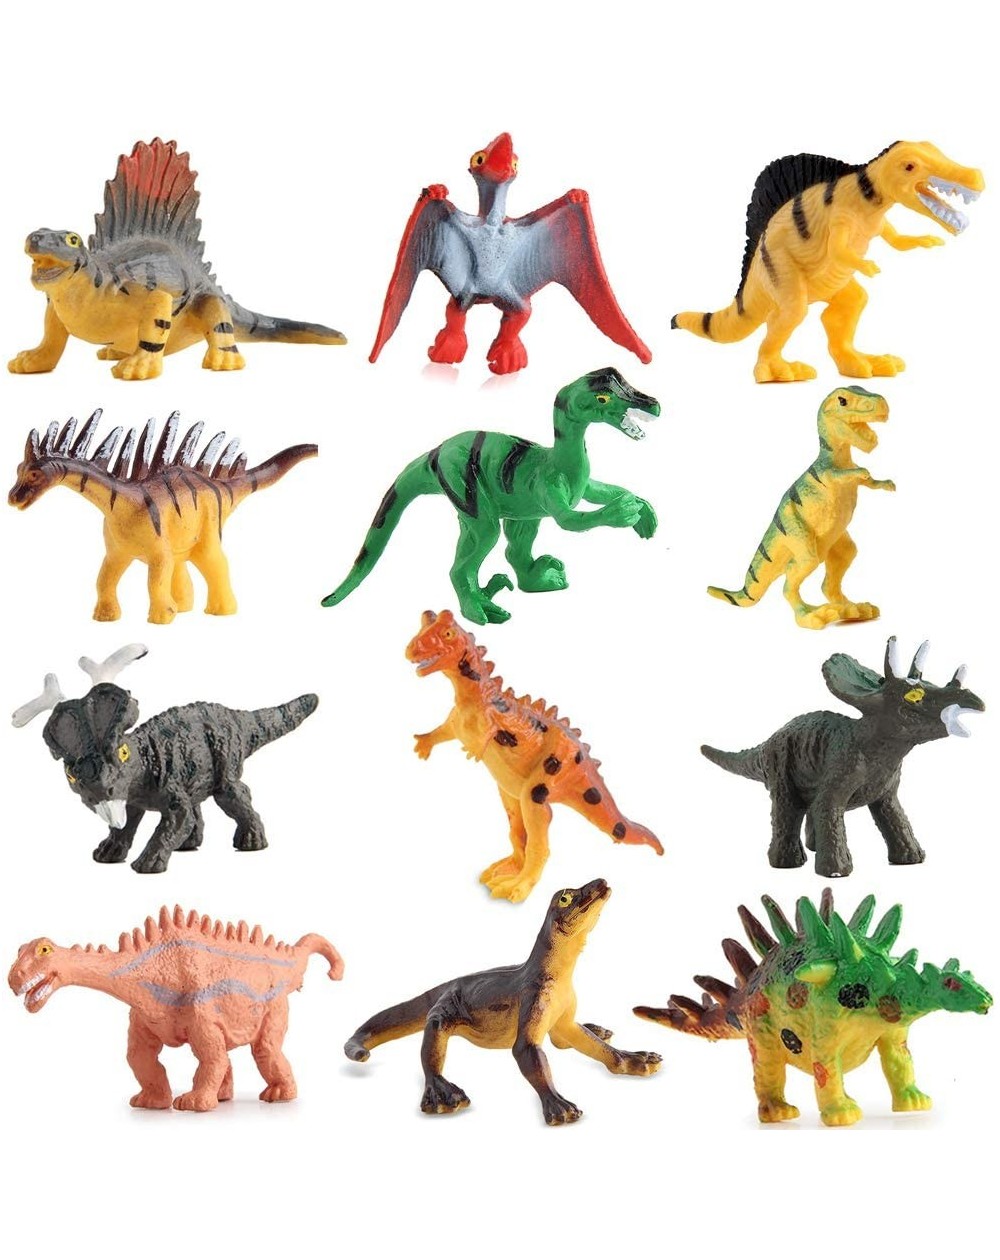 Party Favors 16 Pieces Dinosaur Toys for 3 Year Olds Boys and Girls- Mini Dinosaurs Toys for Cupcake Topper/Birthday Cake Top...